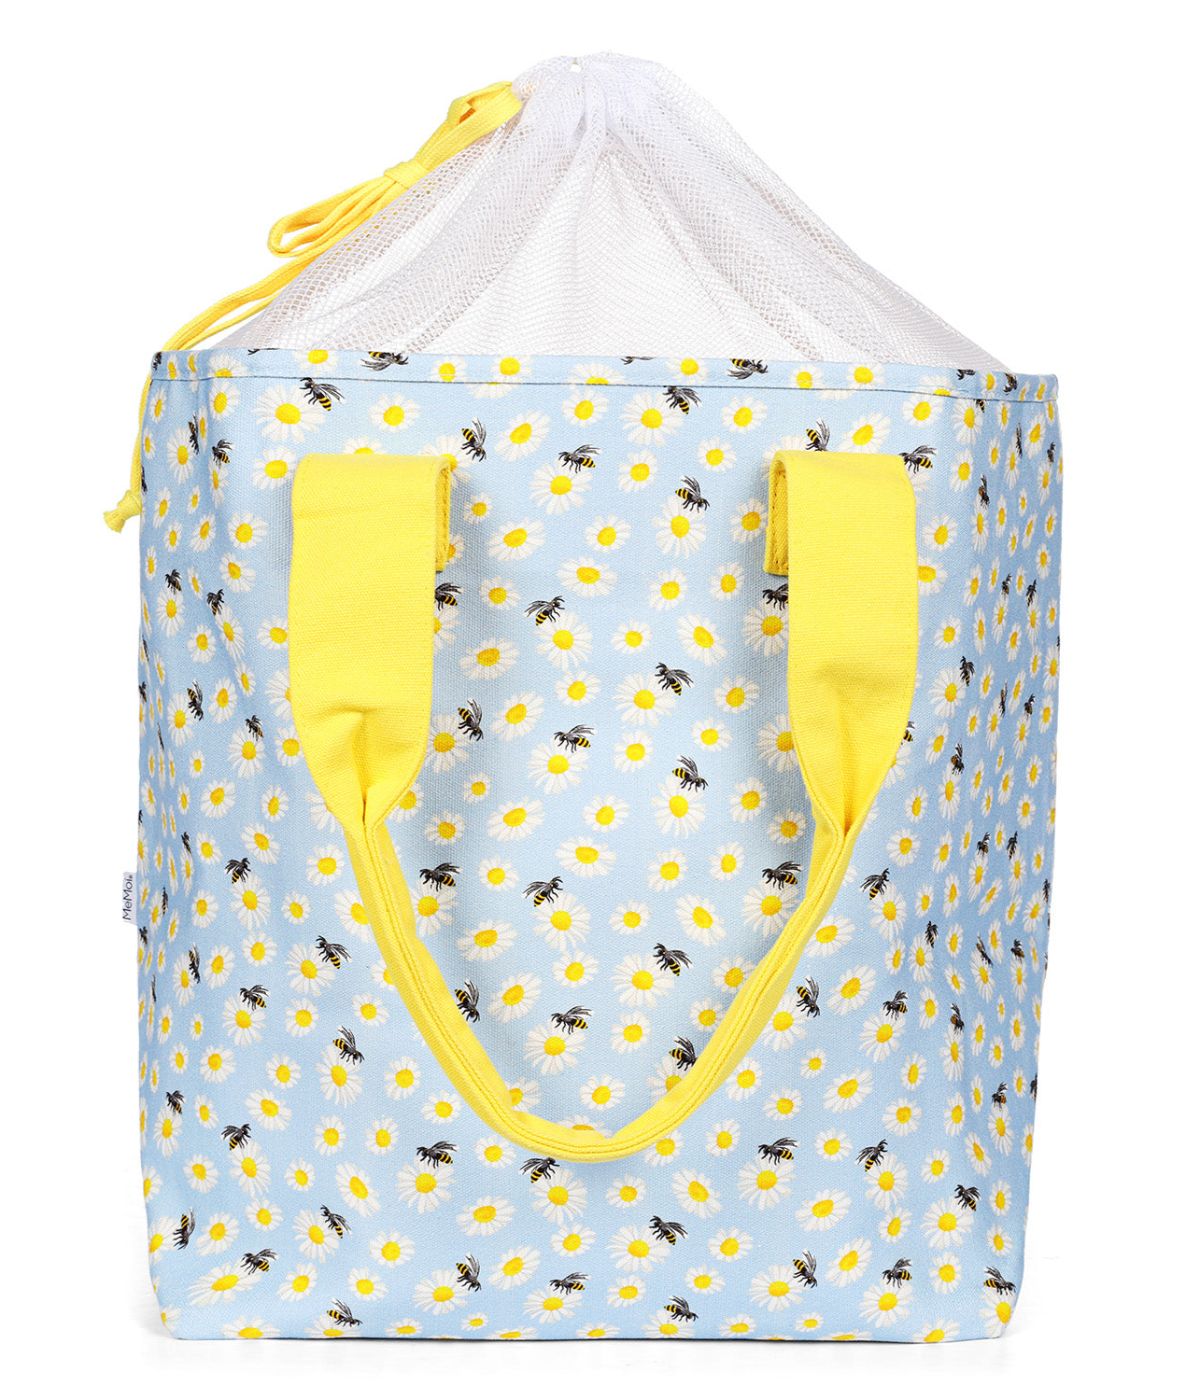 Daisy and Bees Makeup and Tote Bag Set Light Blue